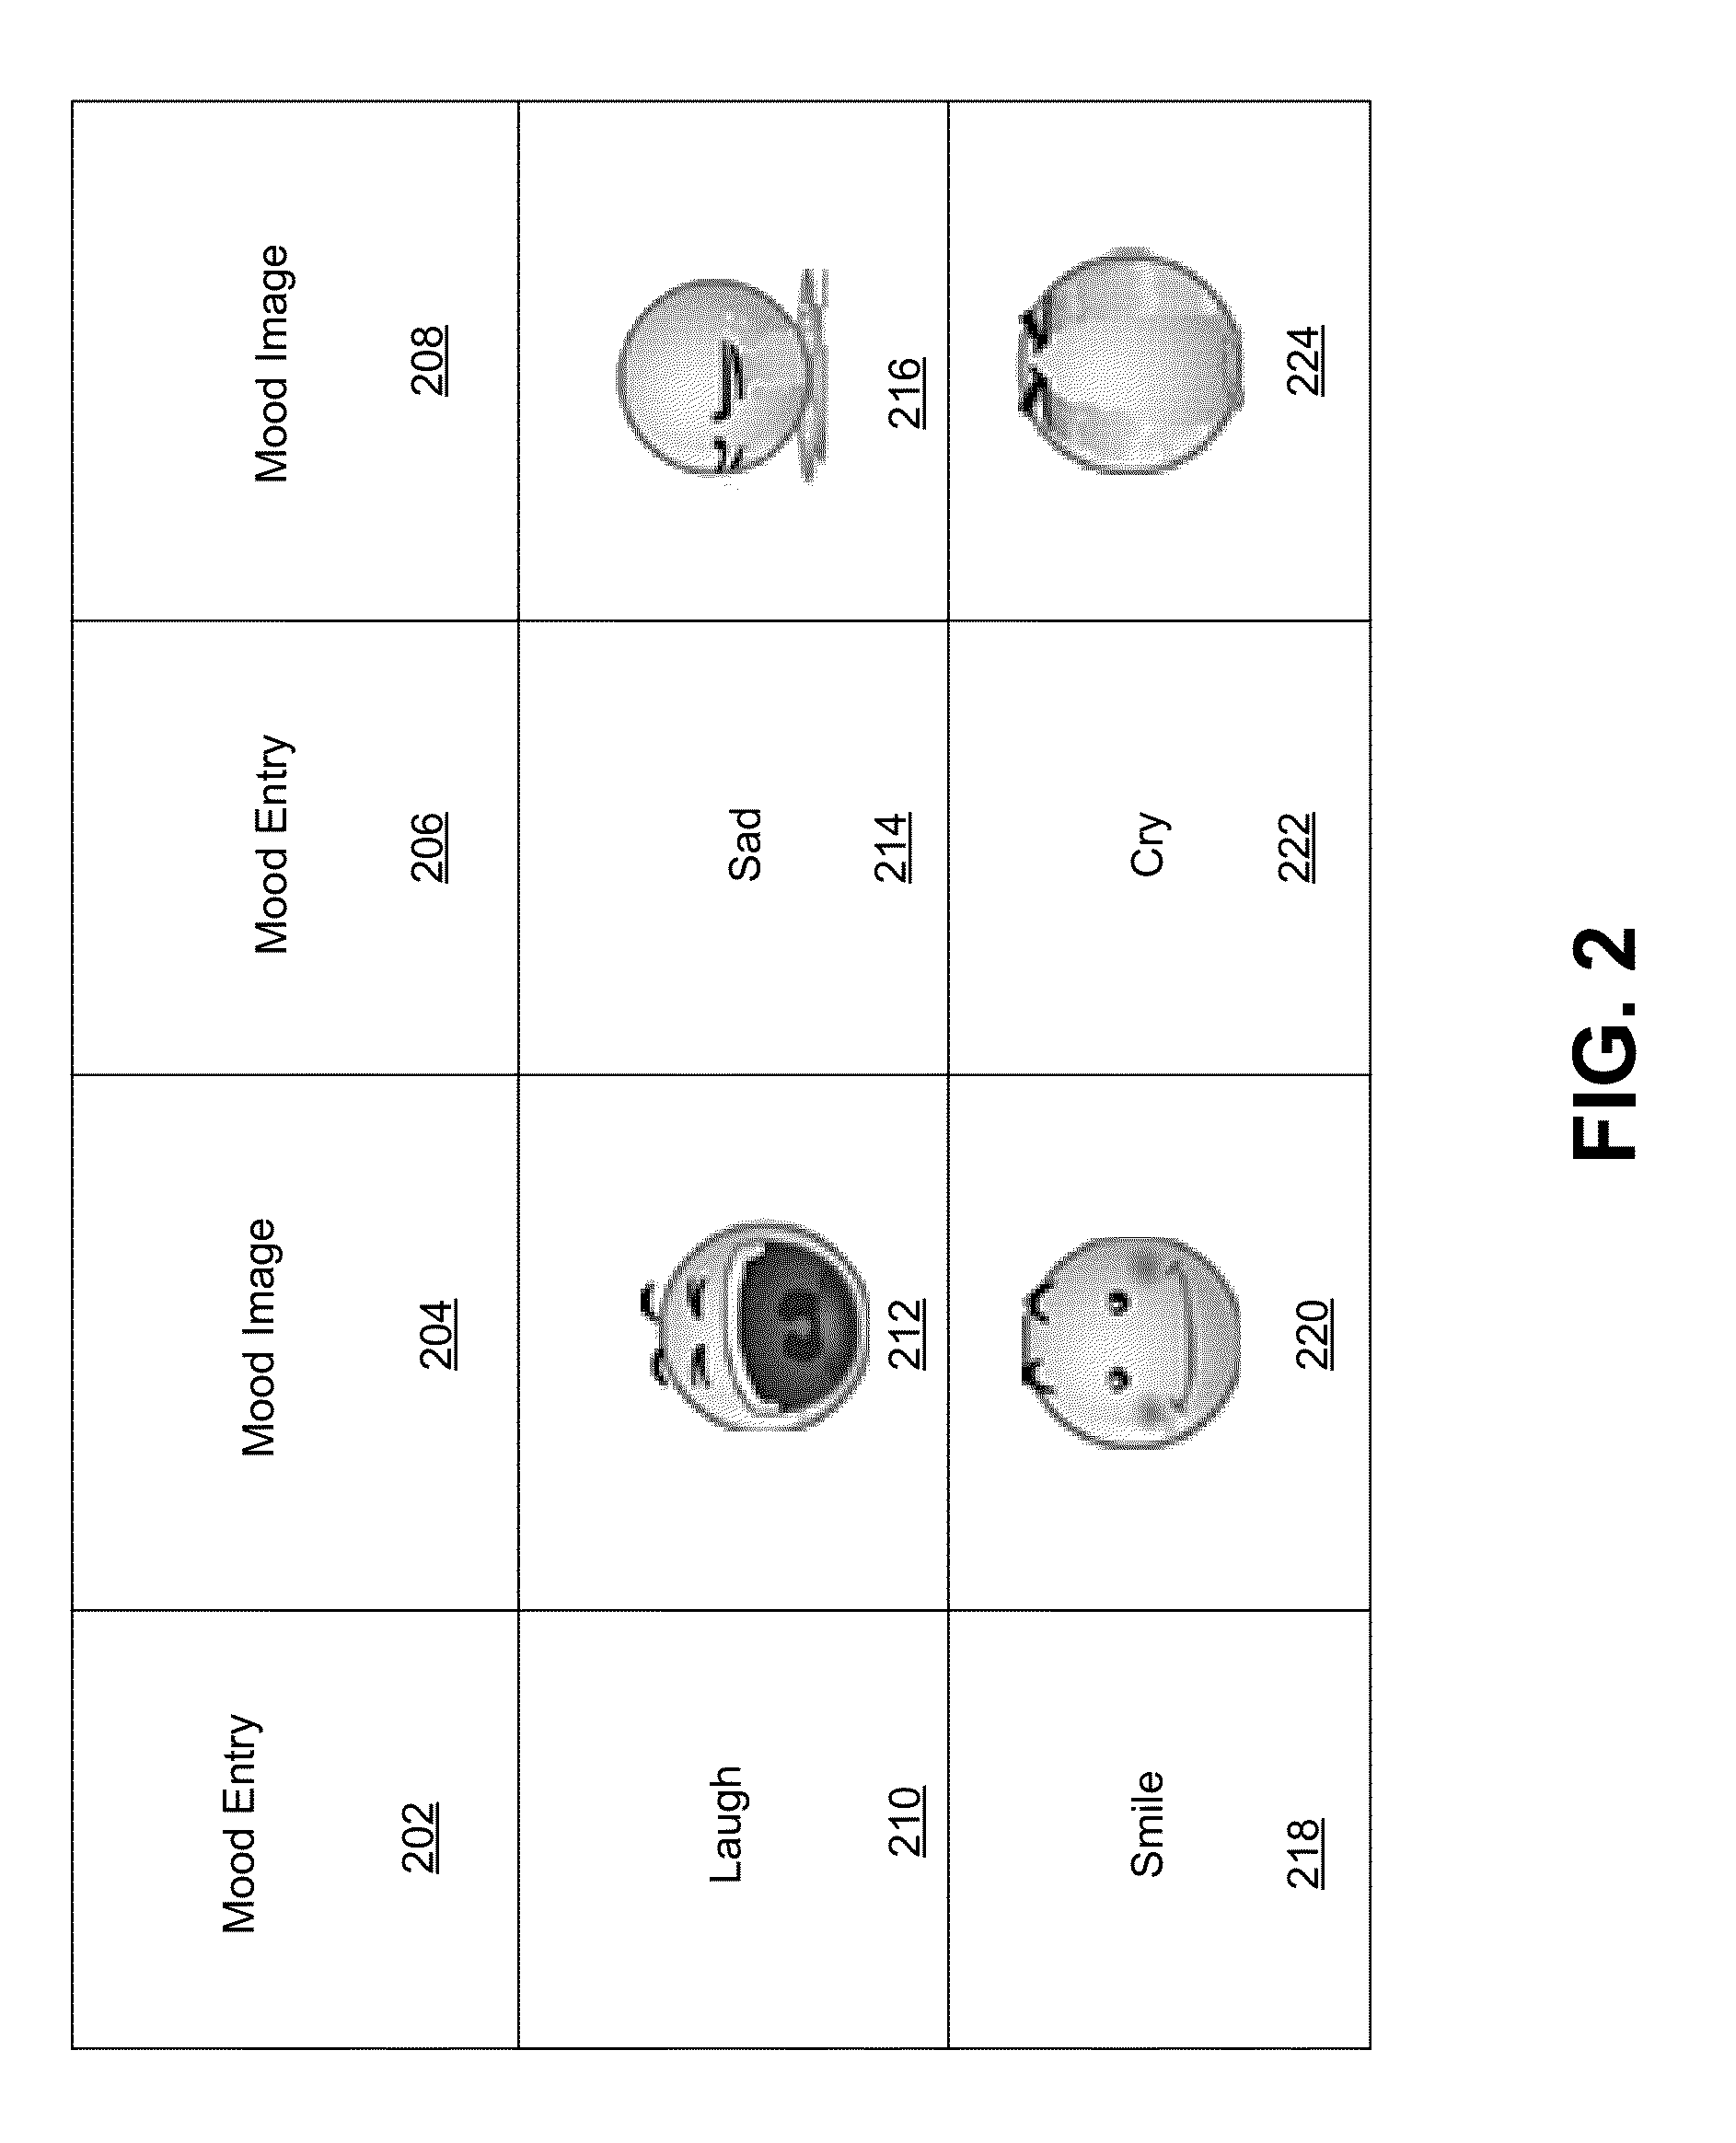 Method and apparatus for verifying images based on image verification codes